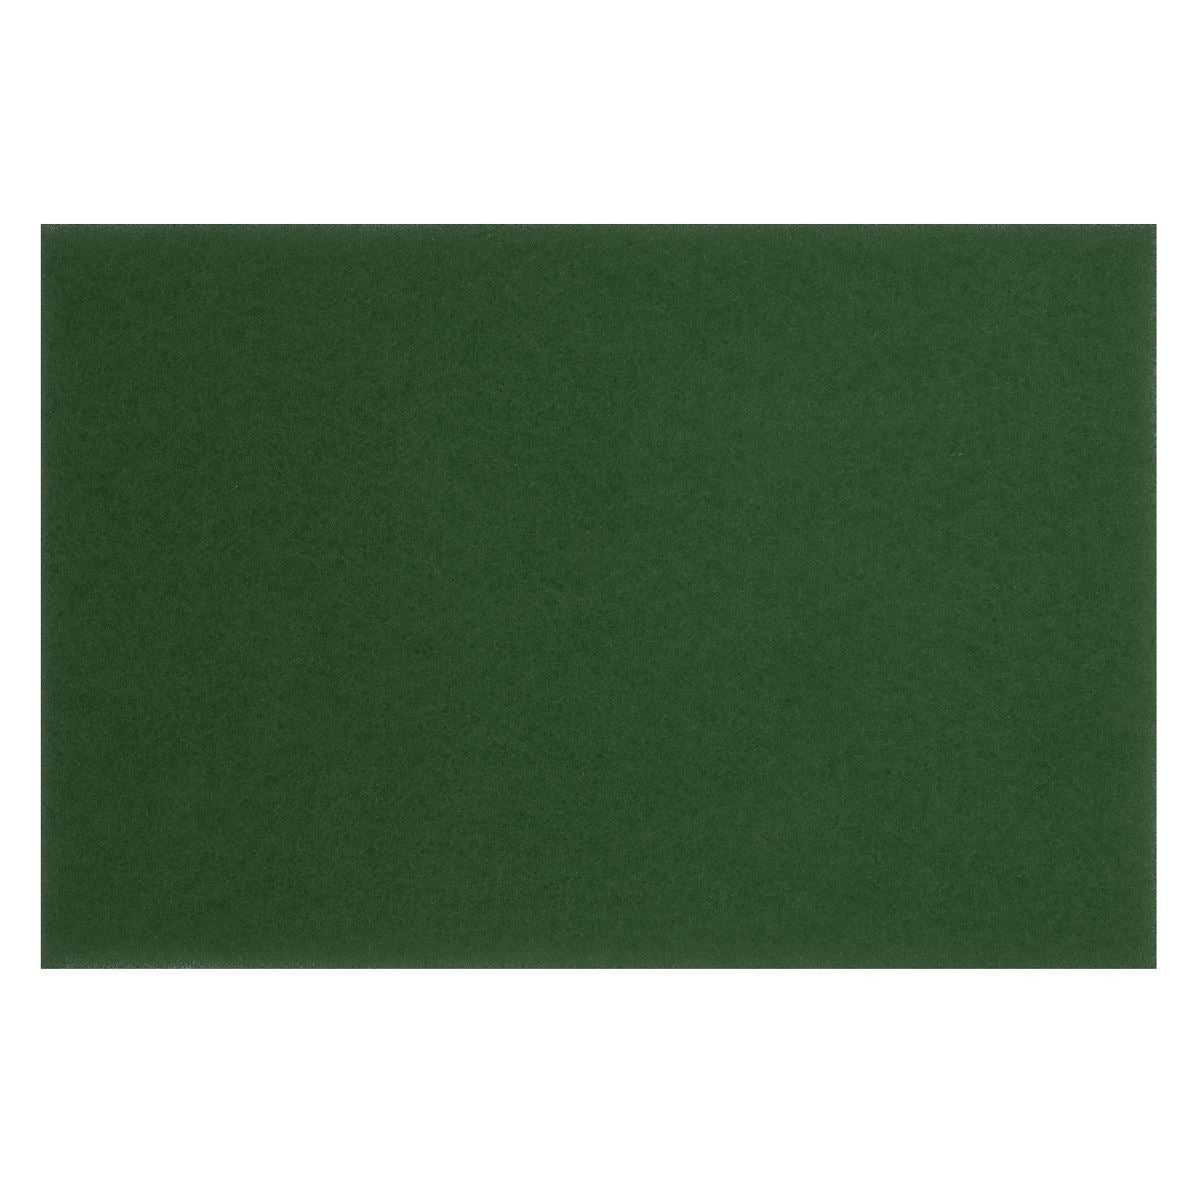 Worksafe by Sealey Green Scrubber Pads 12 x 18 x 1" - Pack of 5